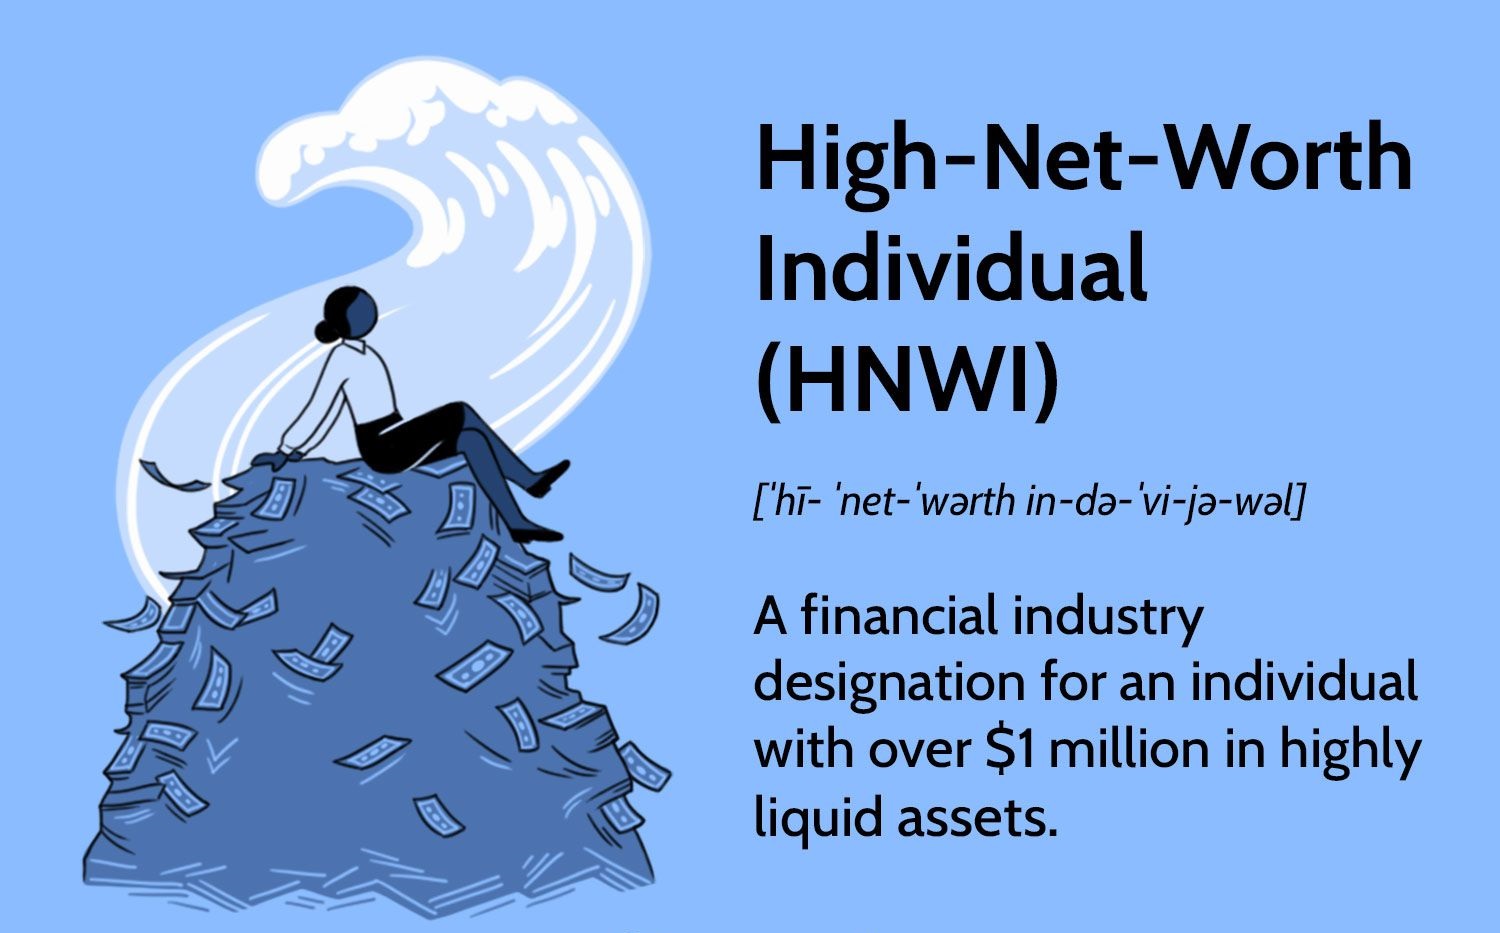 wealthy-individuals-who-seek-high-returns-through-private-investments